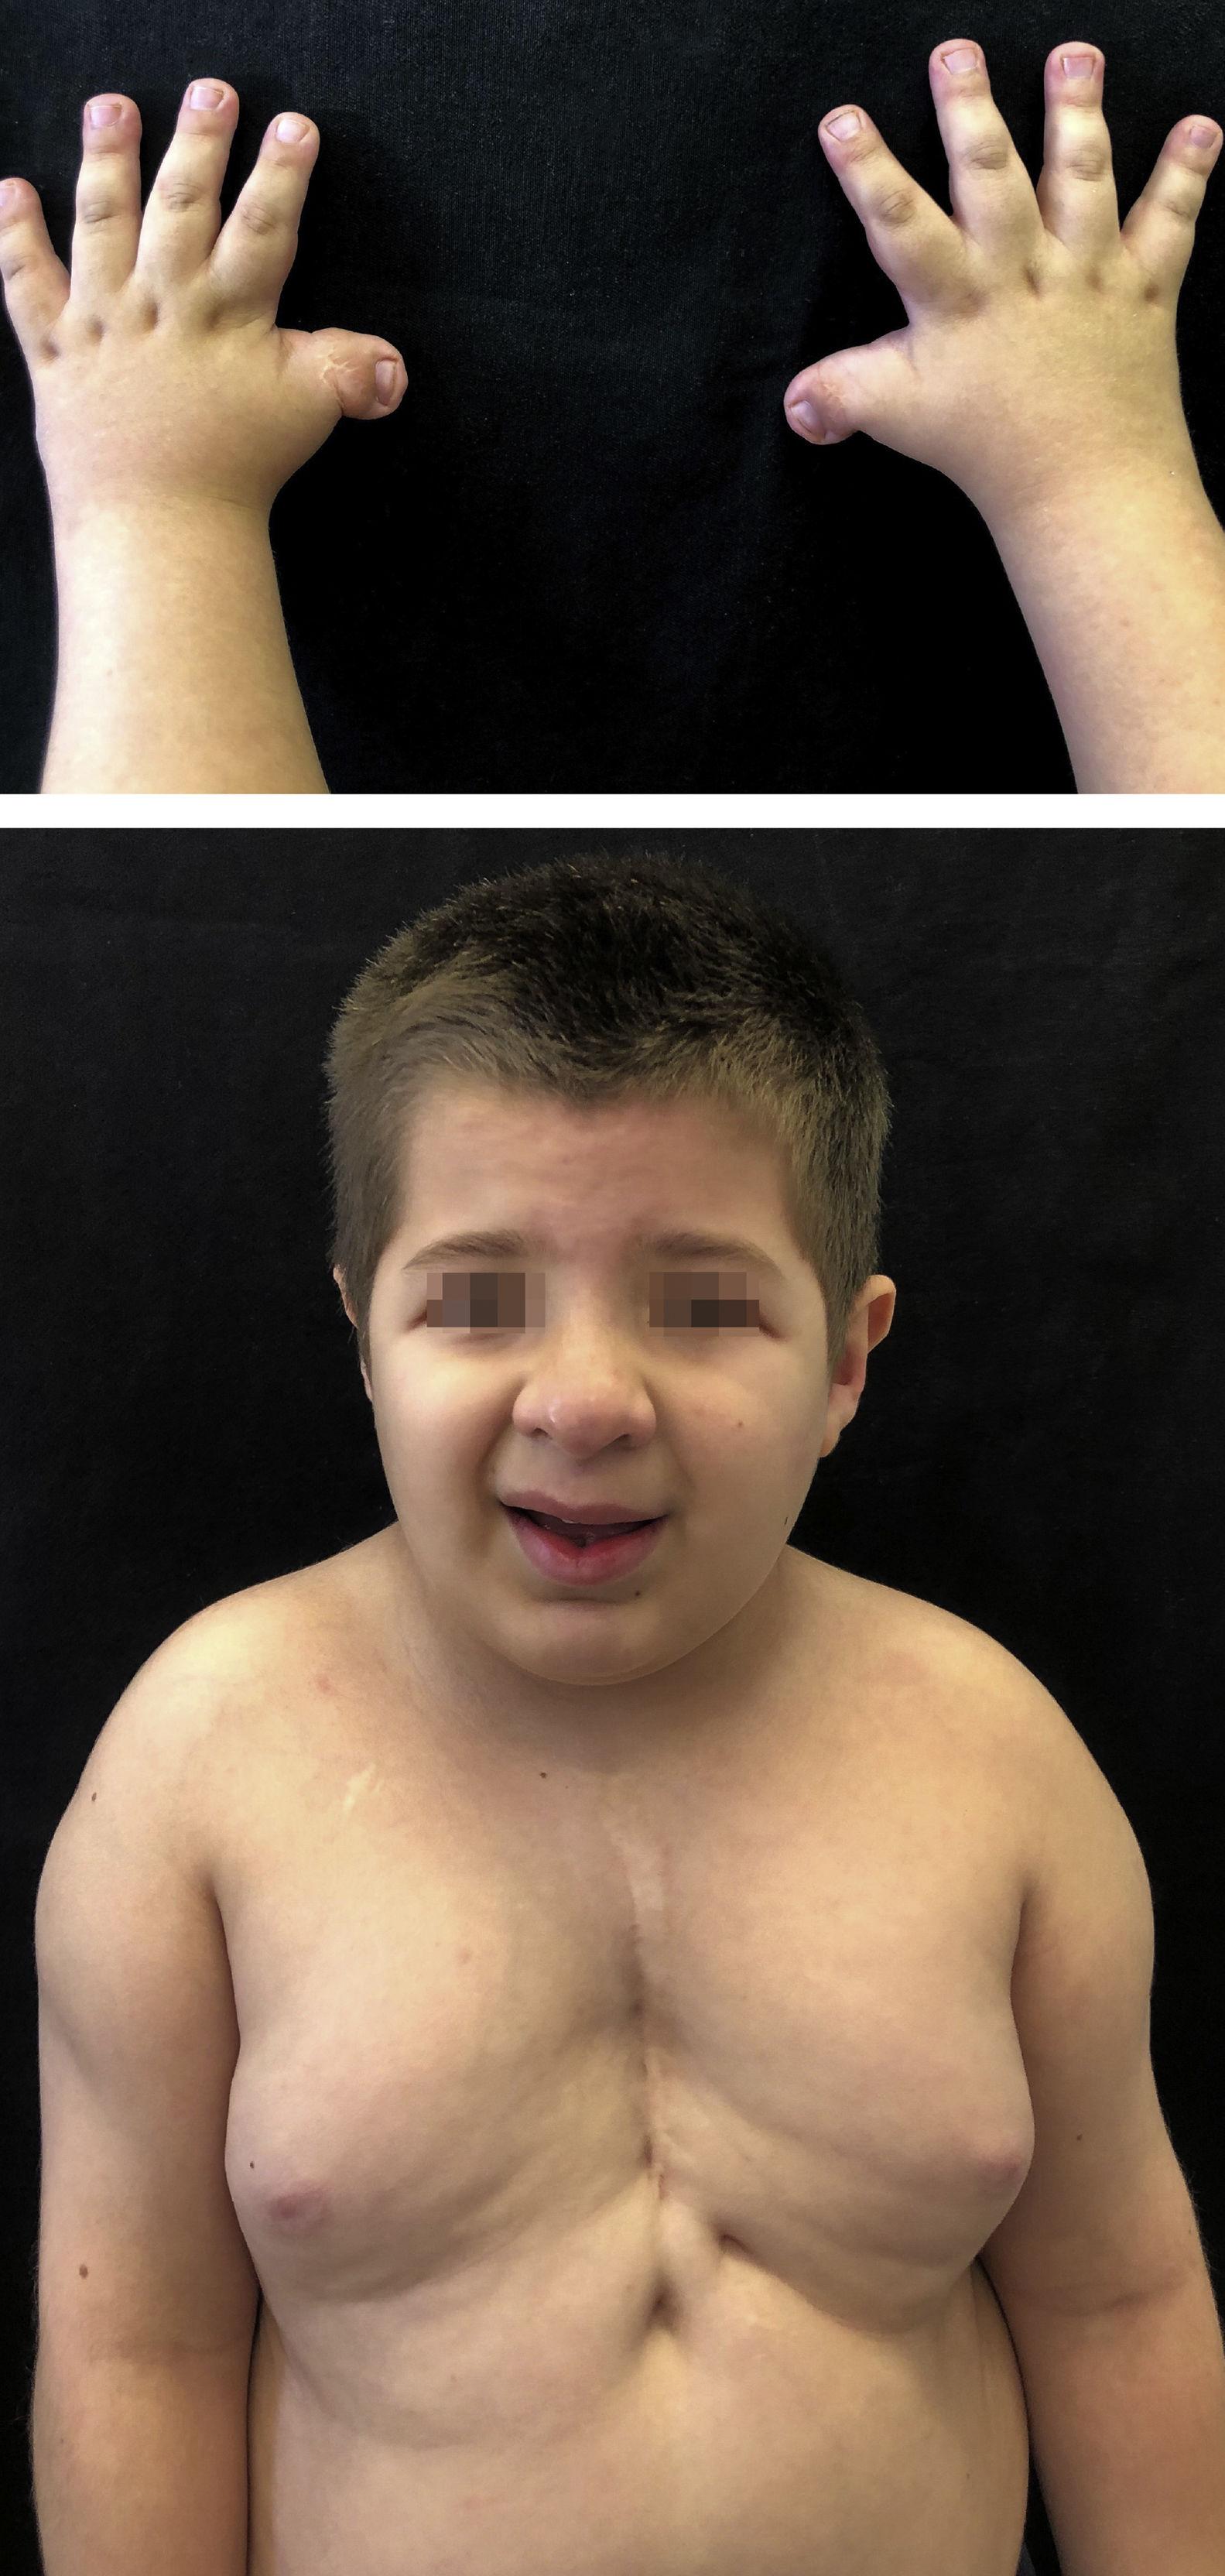 Rubinstein-Taybi syndrome: A report of two siblings with